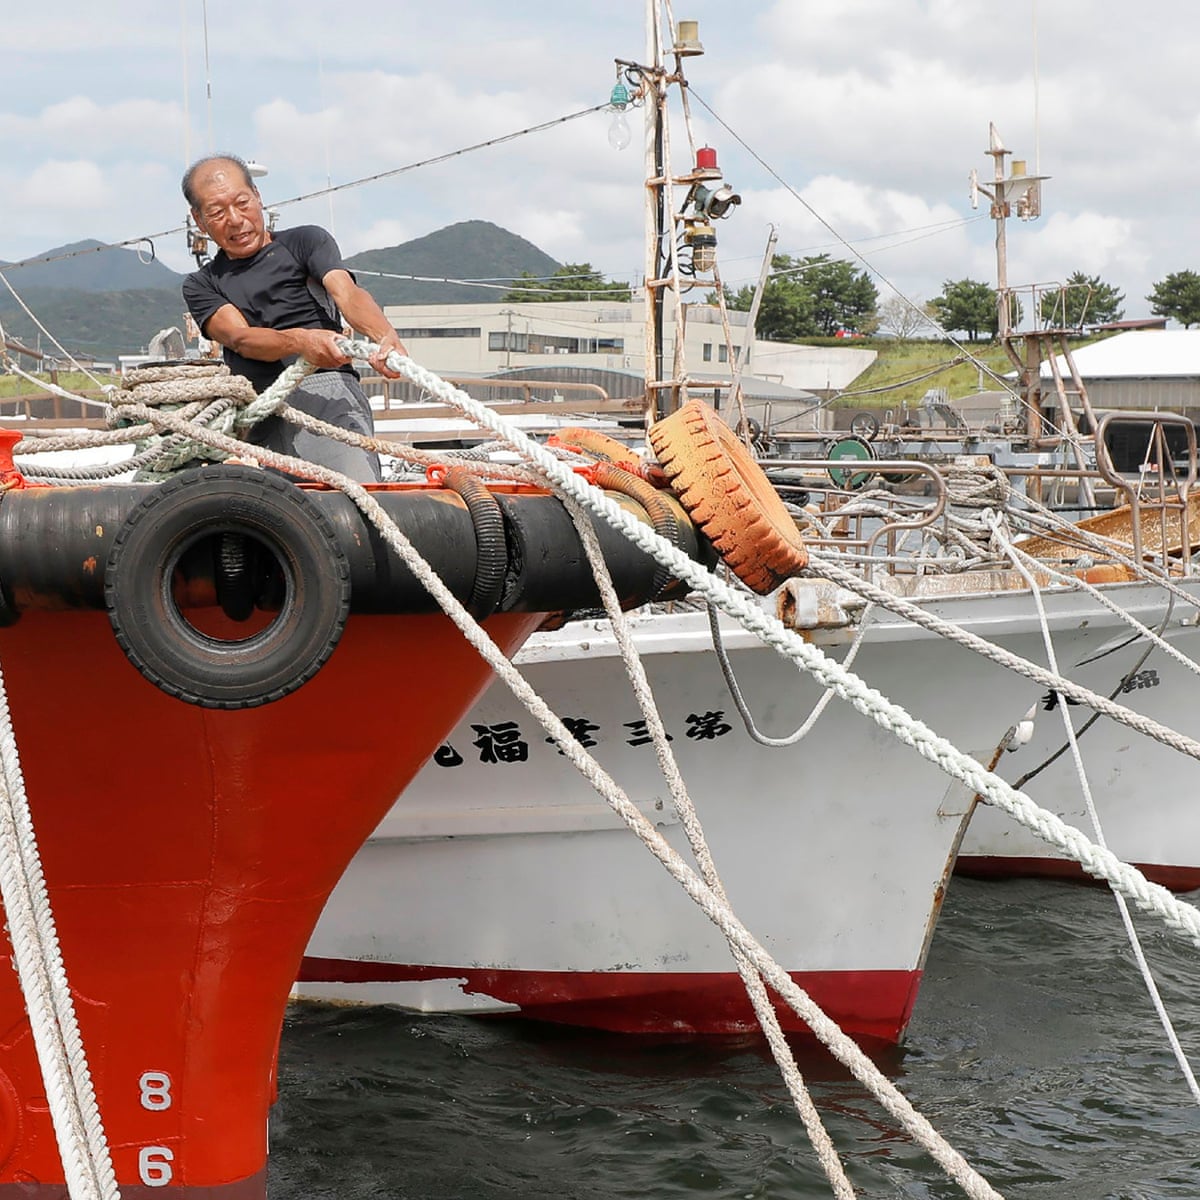 Japan 69-year-old man stranded at sea for 22 hours